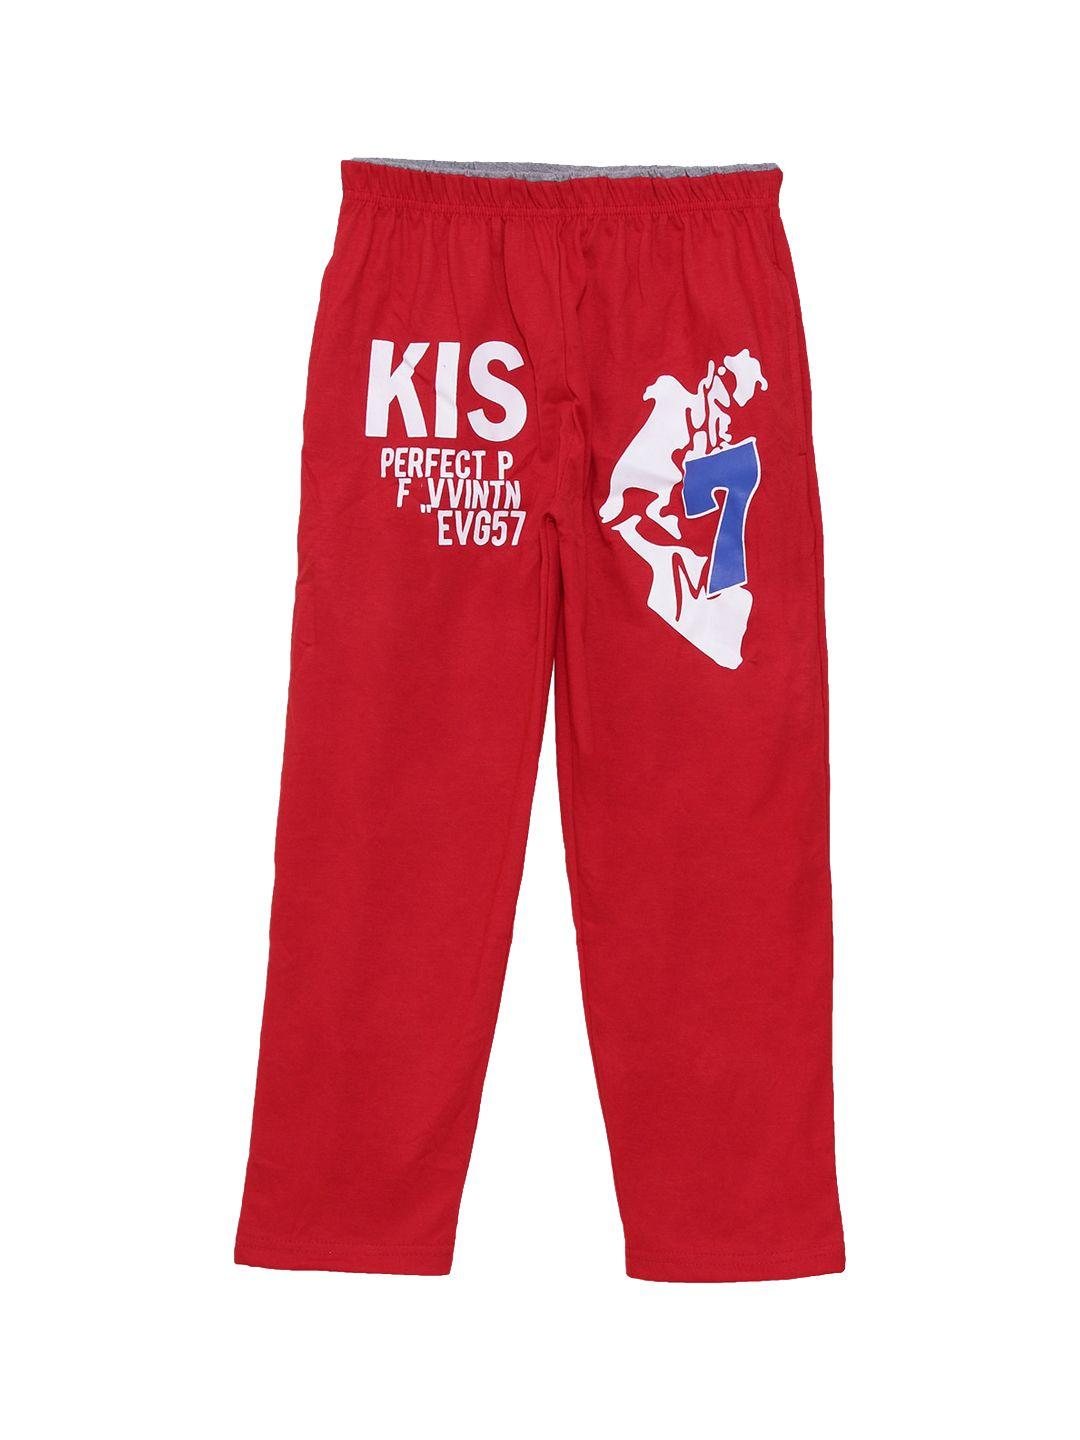 fashionable-boys-red-printed-pure-cotton-regular-fit-track-pants